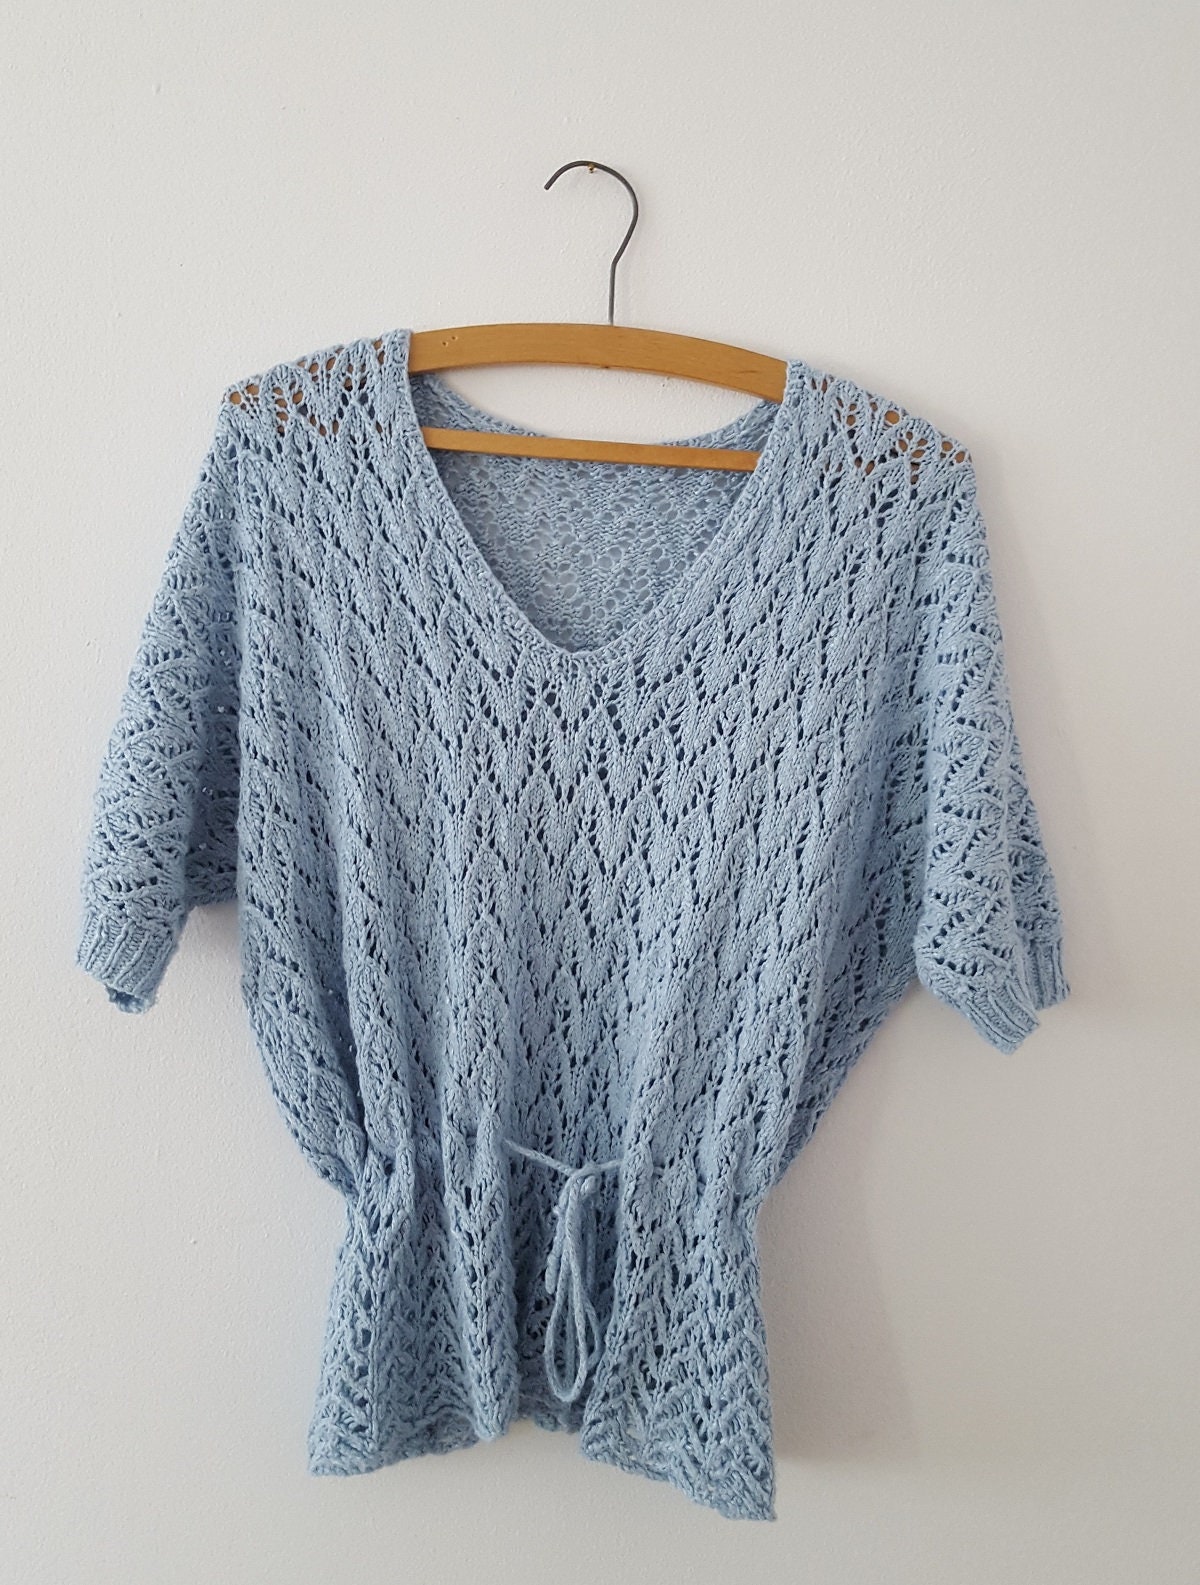 Knitting Pattern for Lace Sweater Sea Holly - Etsy